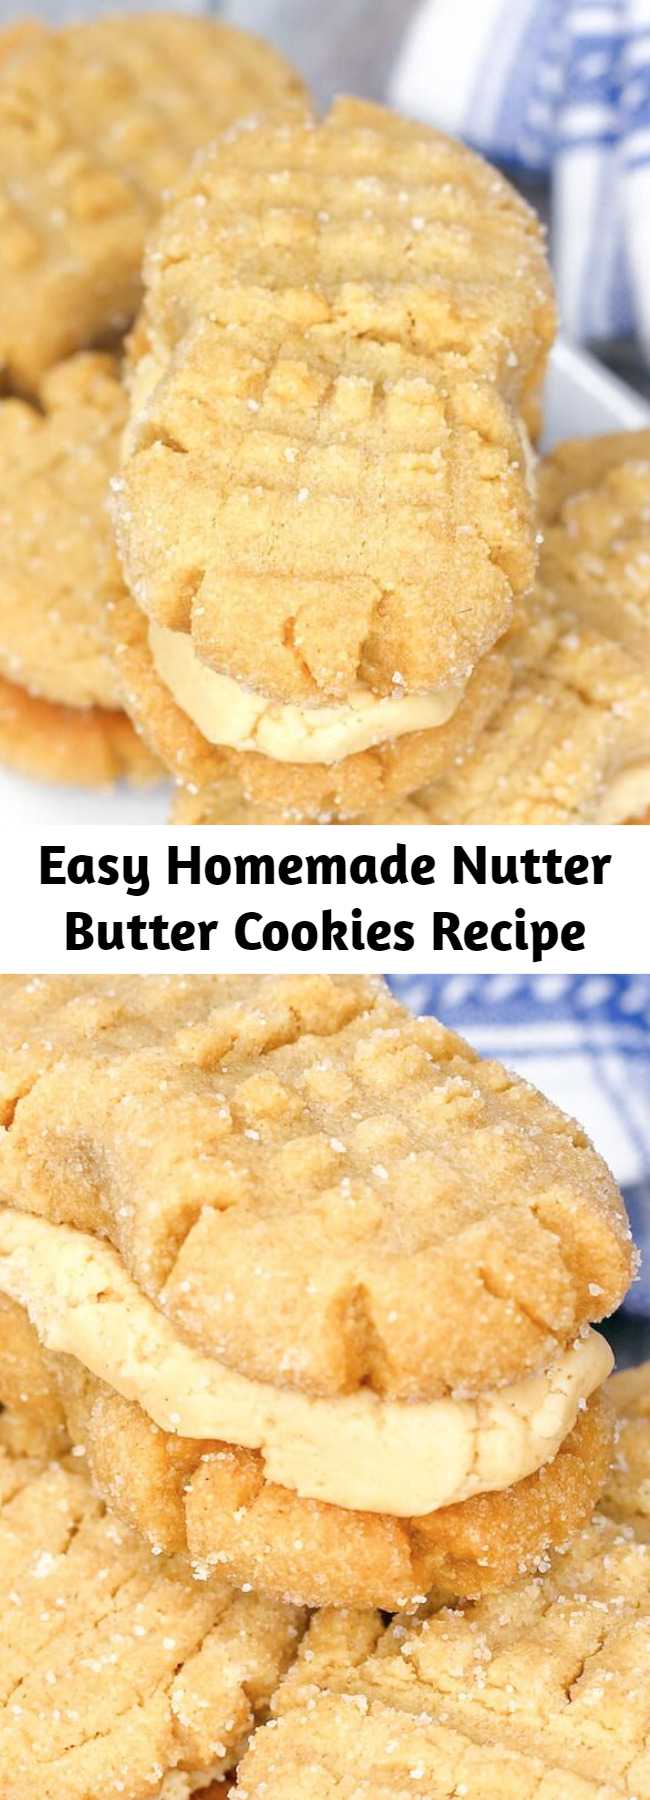 Easy Homemade Nutter Butter Cookies Recipe - Soft peanut butter cookies filled with luscious peanut butter cream — these Homemade Nutter Butter cookies might just be better than the "real" thing! #cookies #peanutbutter #desserts